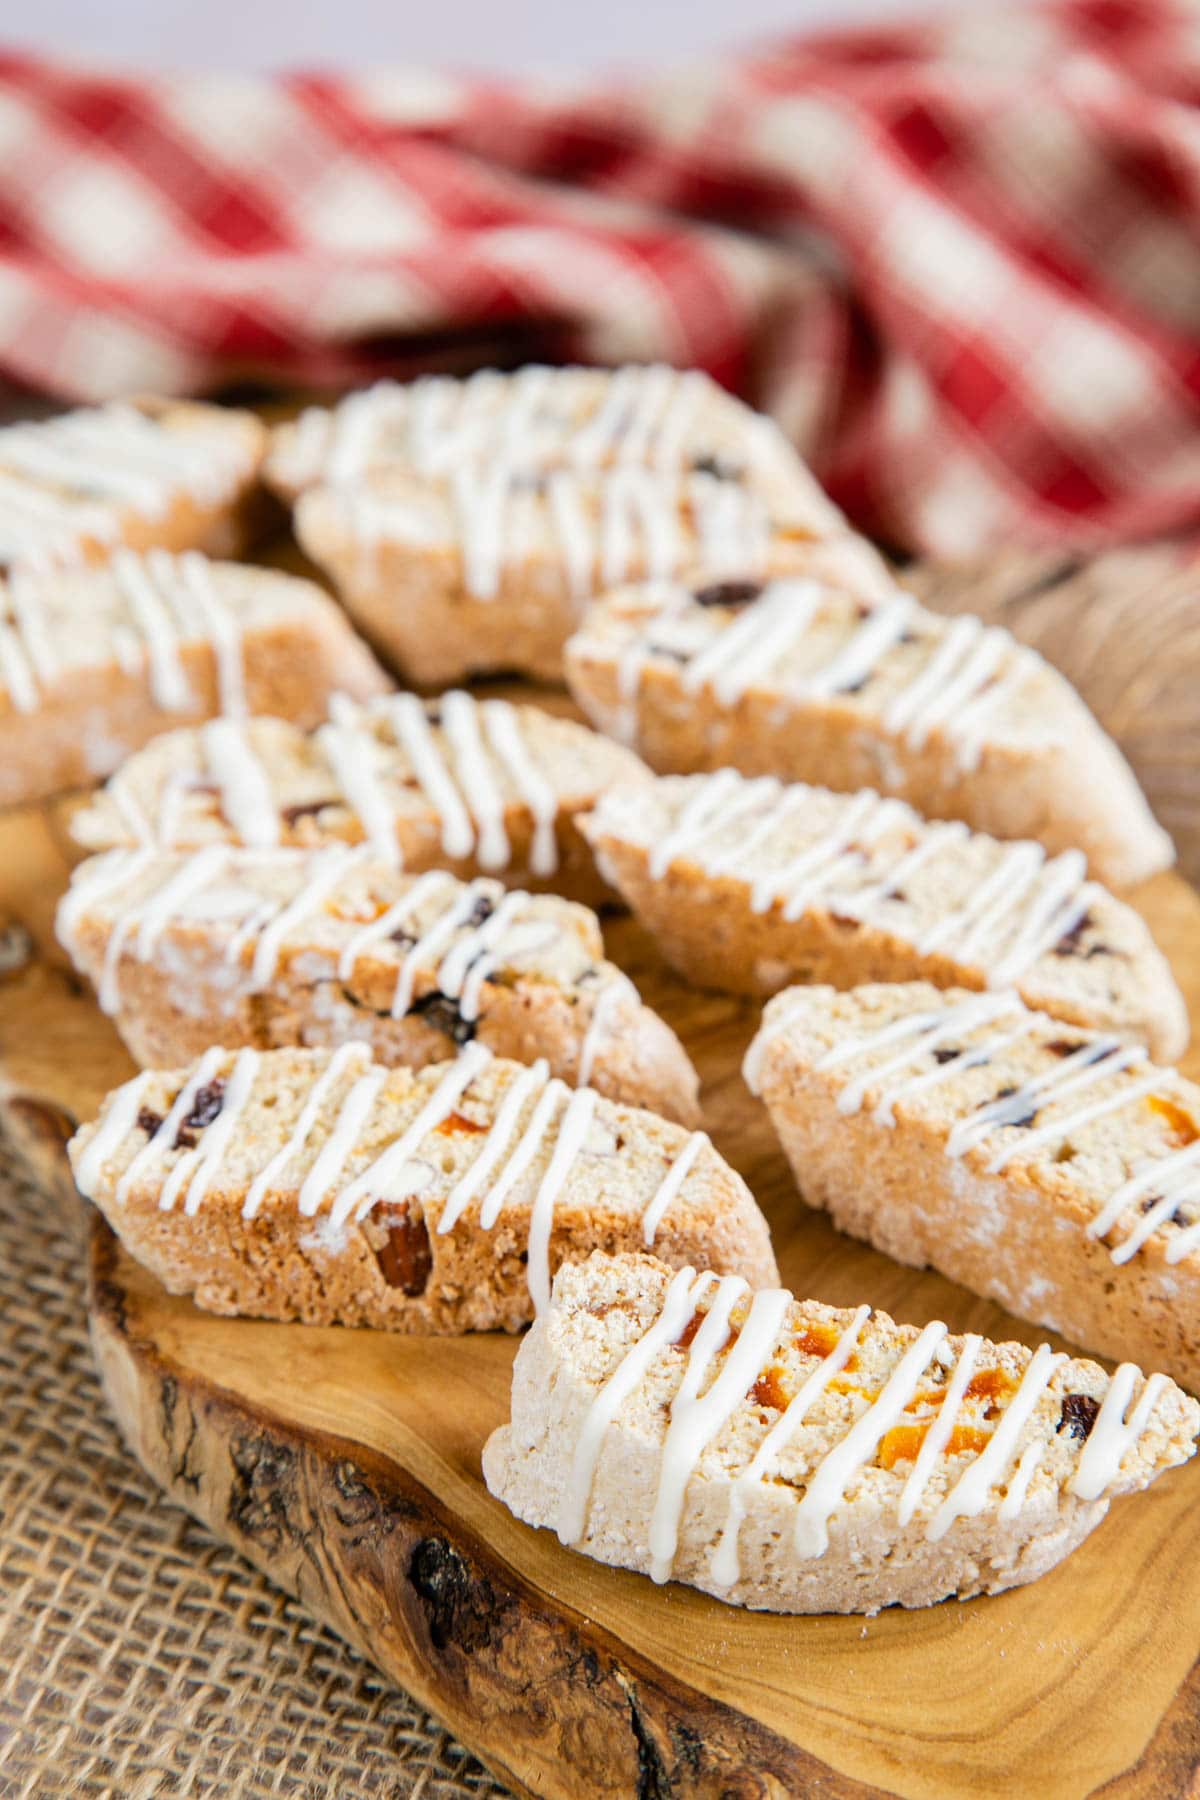 Drizzle glazed biscotti arranged on a wooden board, ready to serve with coffee.